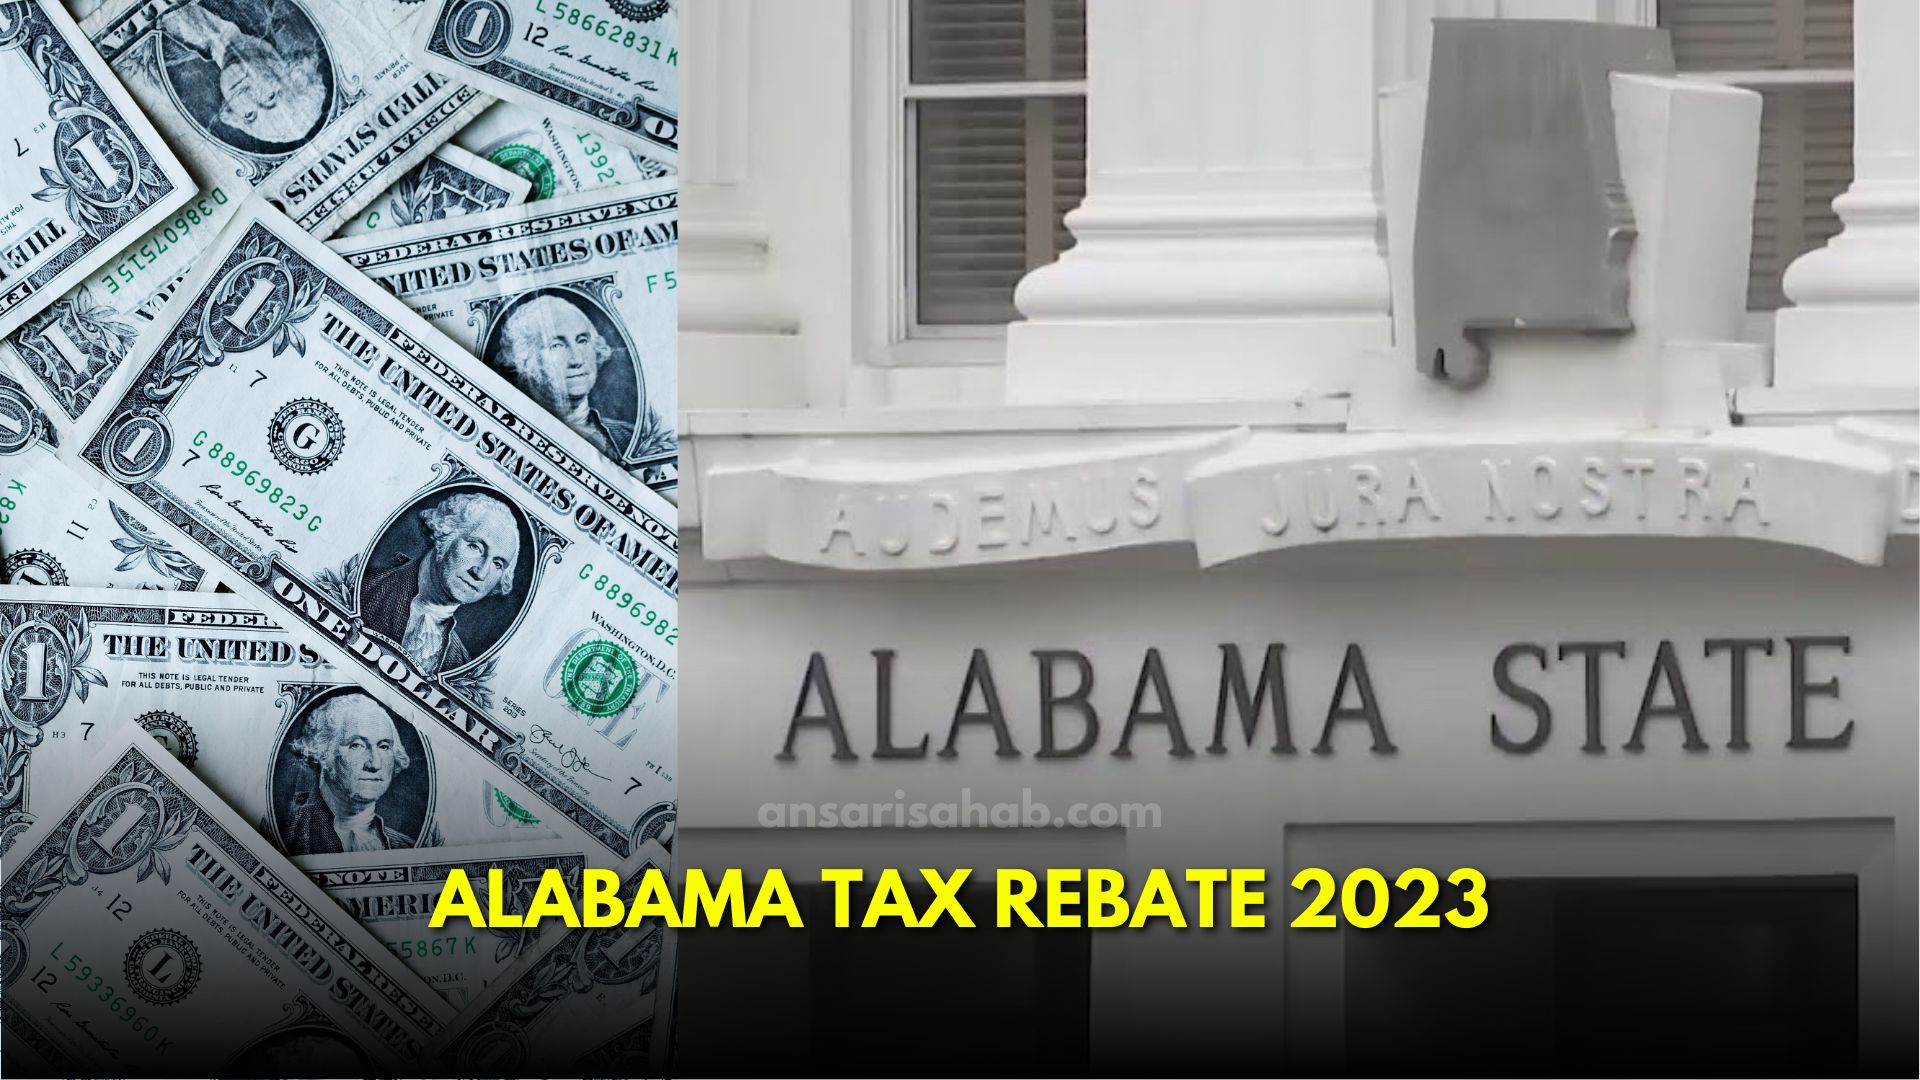 Alabama Tax Rebate Your Guide to Tracking Your Payment and